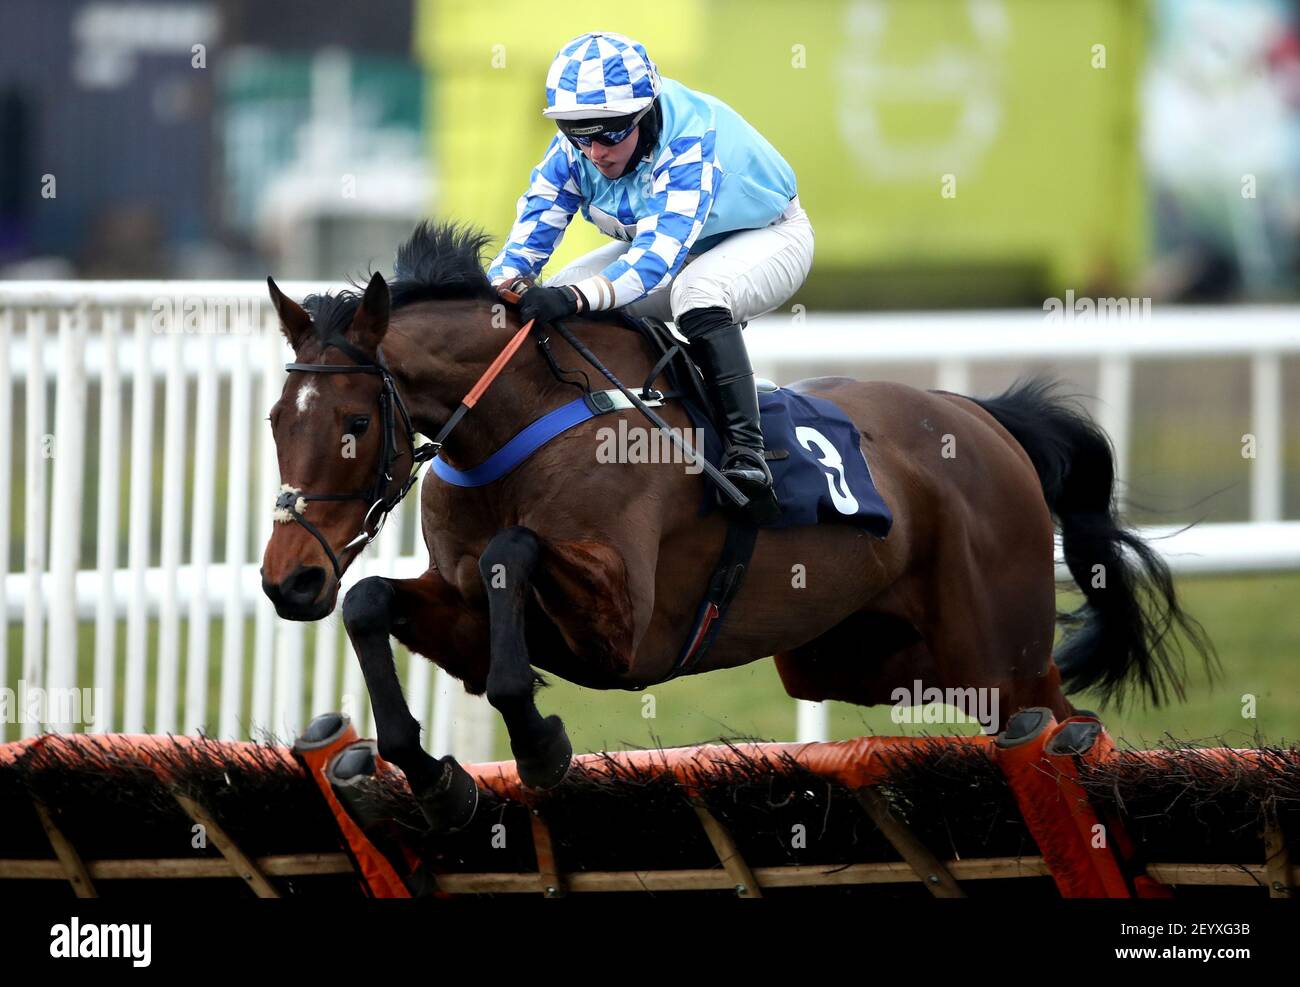 Erne River ridden by Charlie Hammond clears a fence on their way to winning the Virgin Bet Novices' Hurdle at Doncaster Racecourse. Picture date: Saturday March 6, 2021. Stock Photo